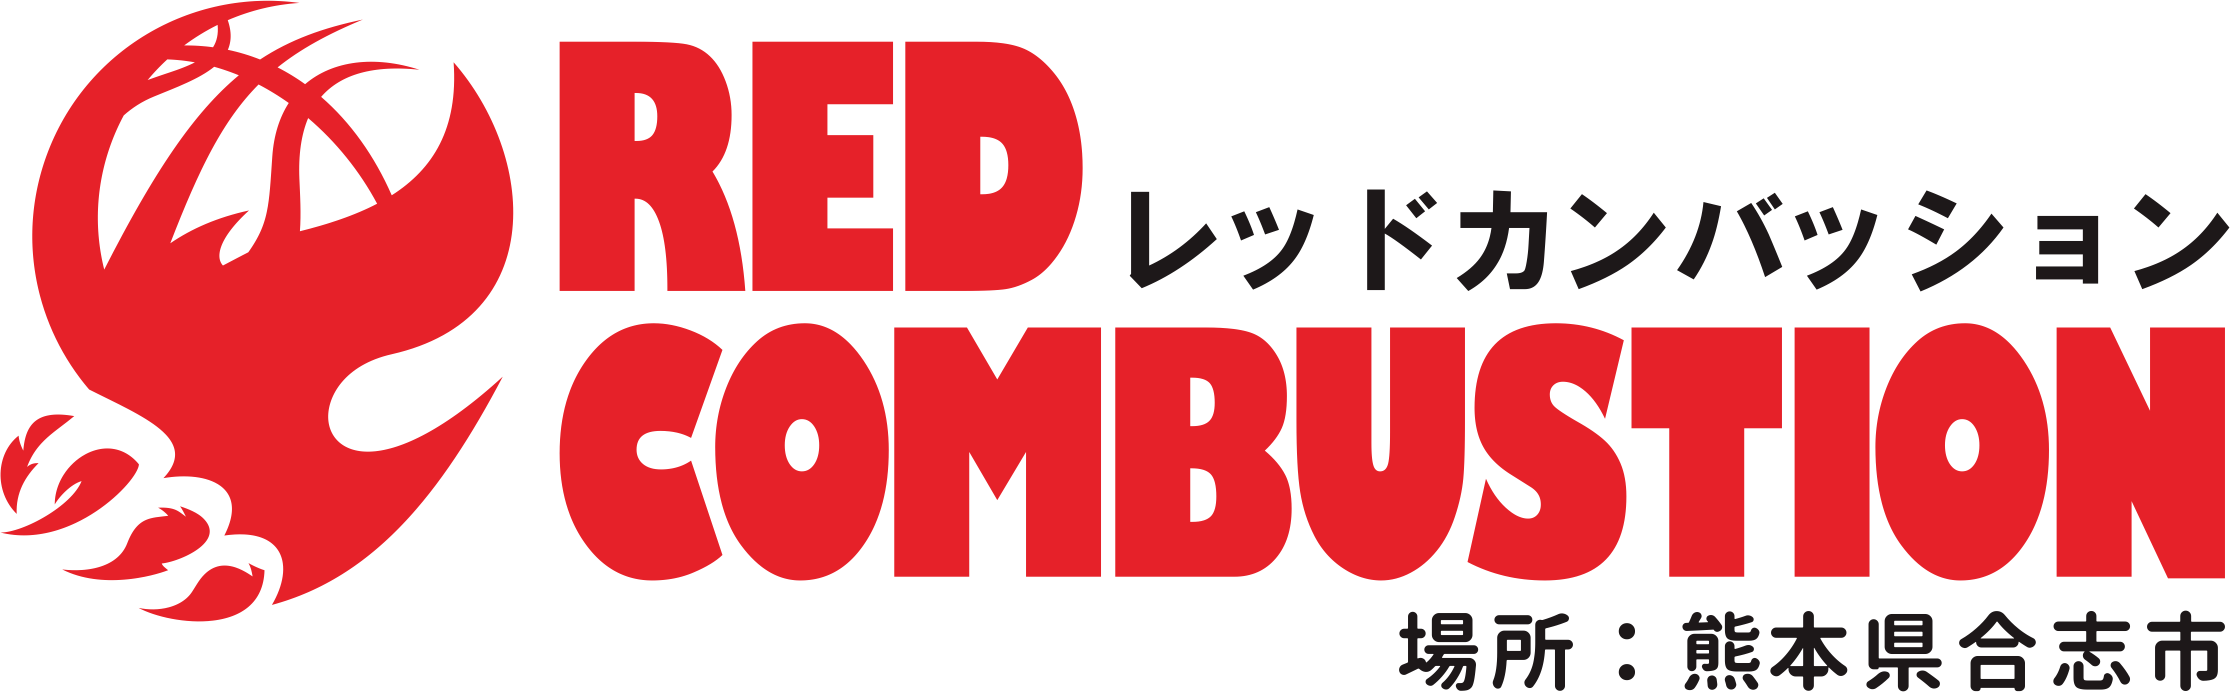 REDCOMBUSTION